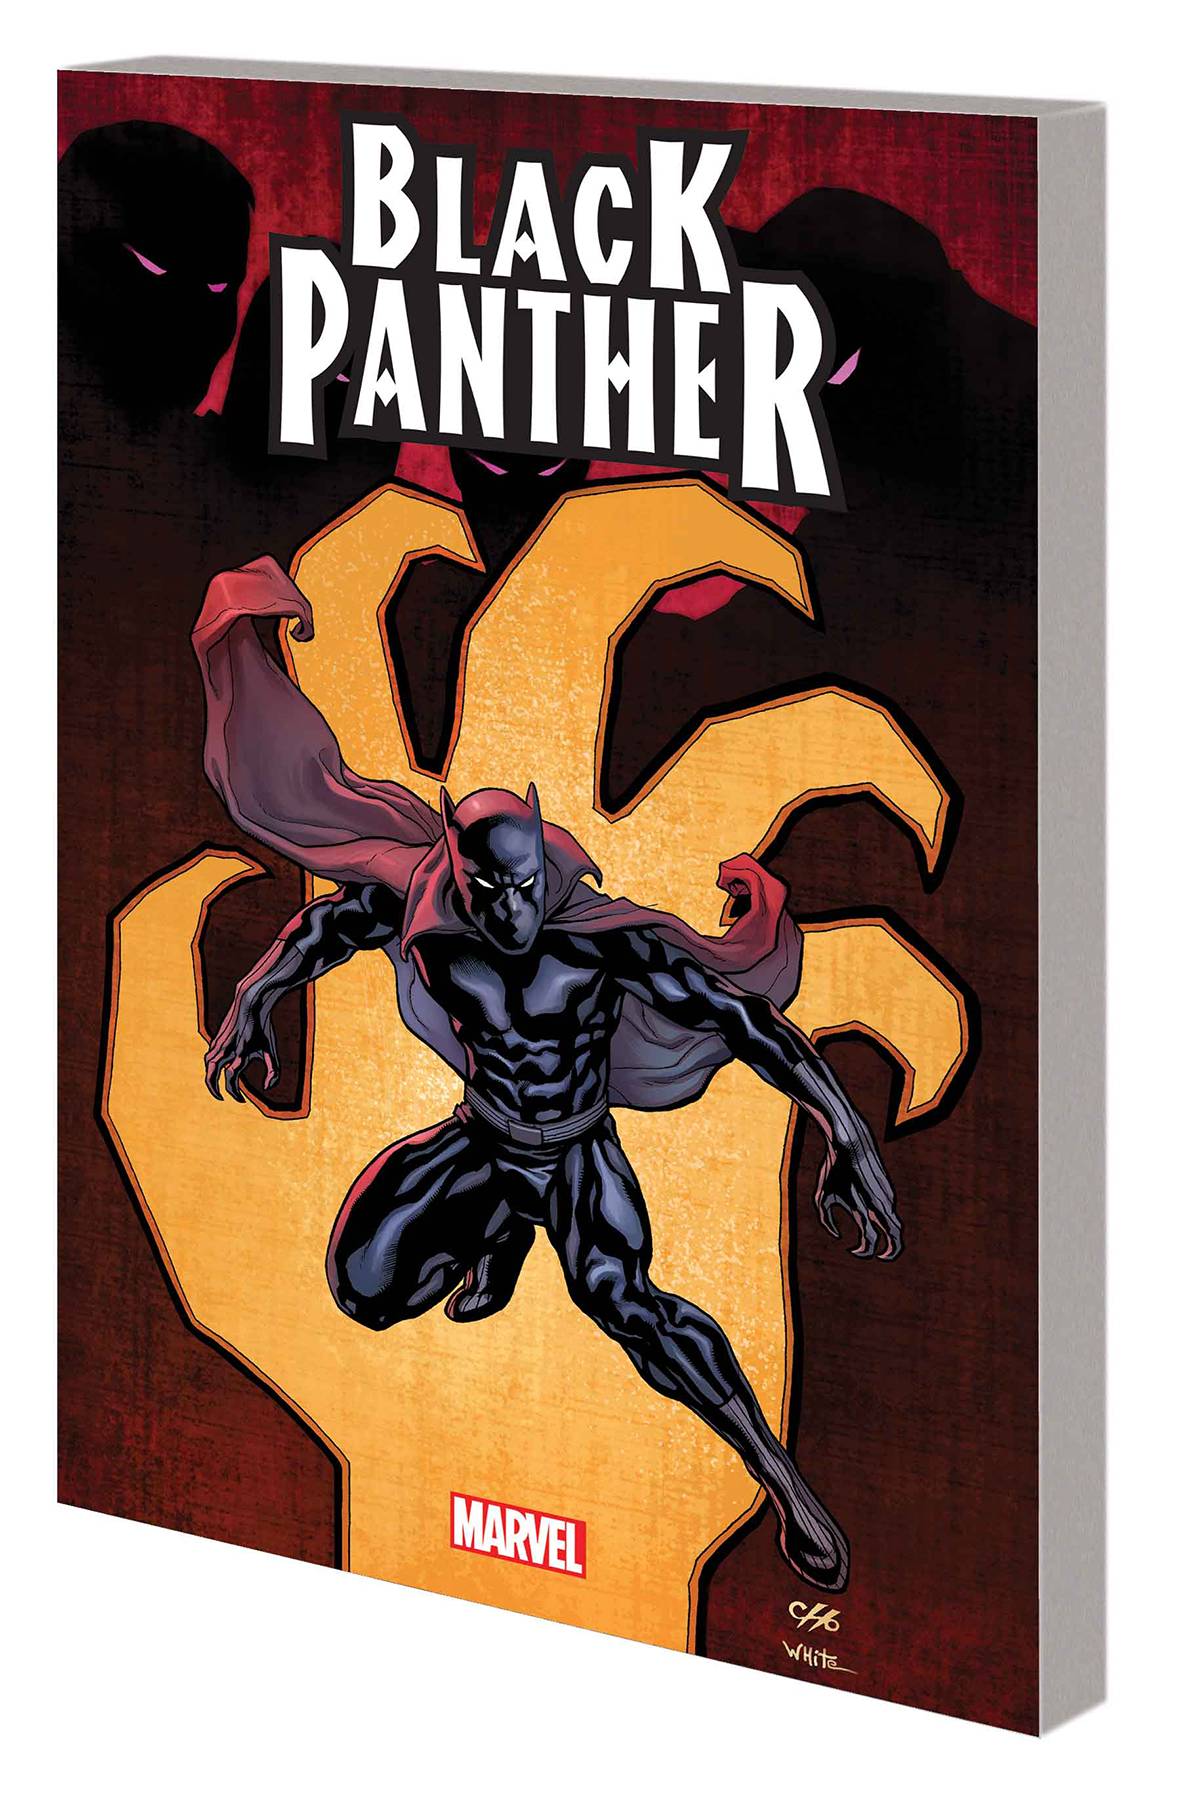 Black Panther by Hudlin Graphic Novel Volume 1 Complete Collection